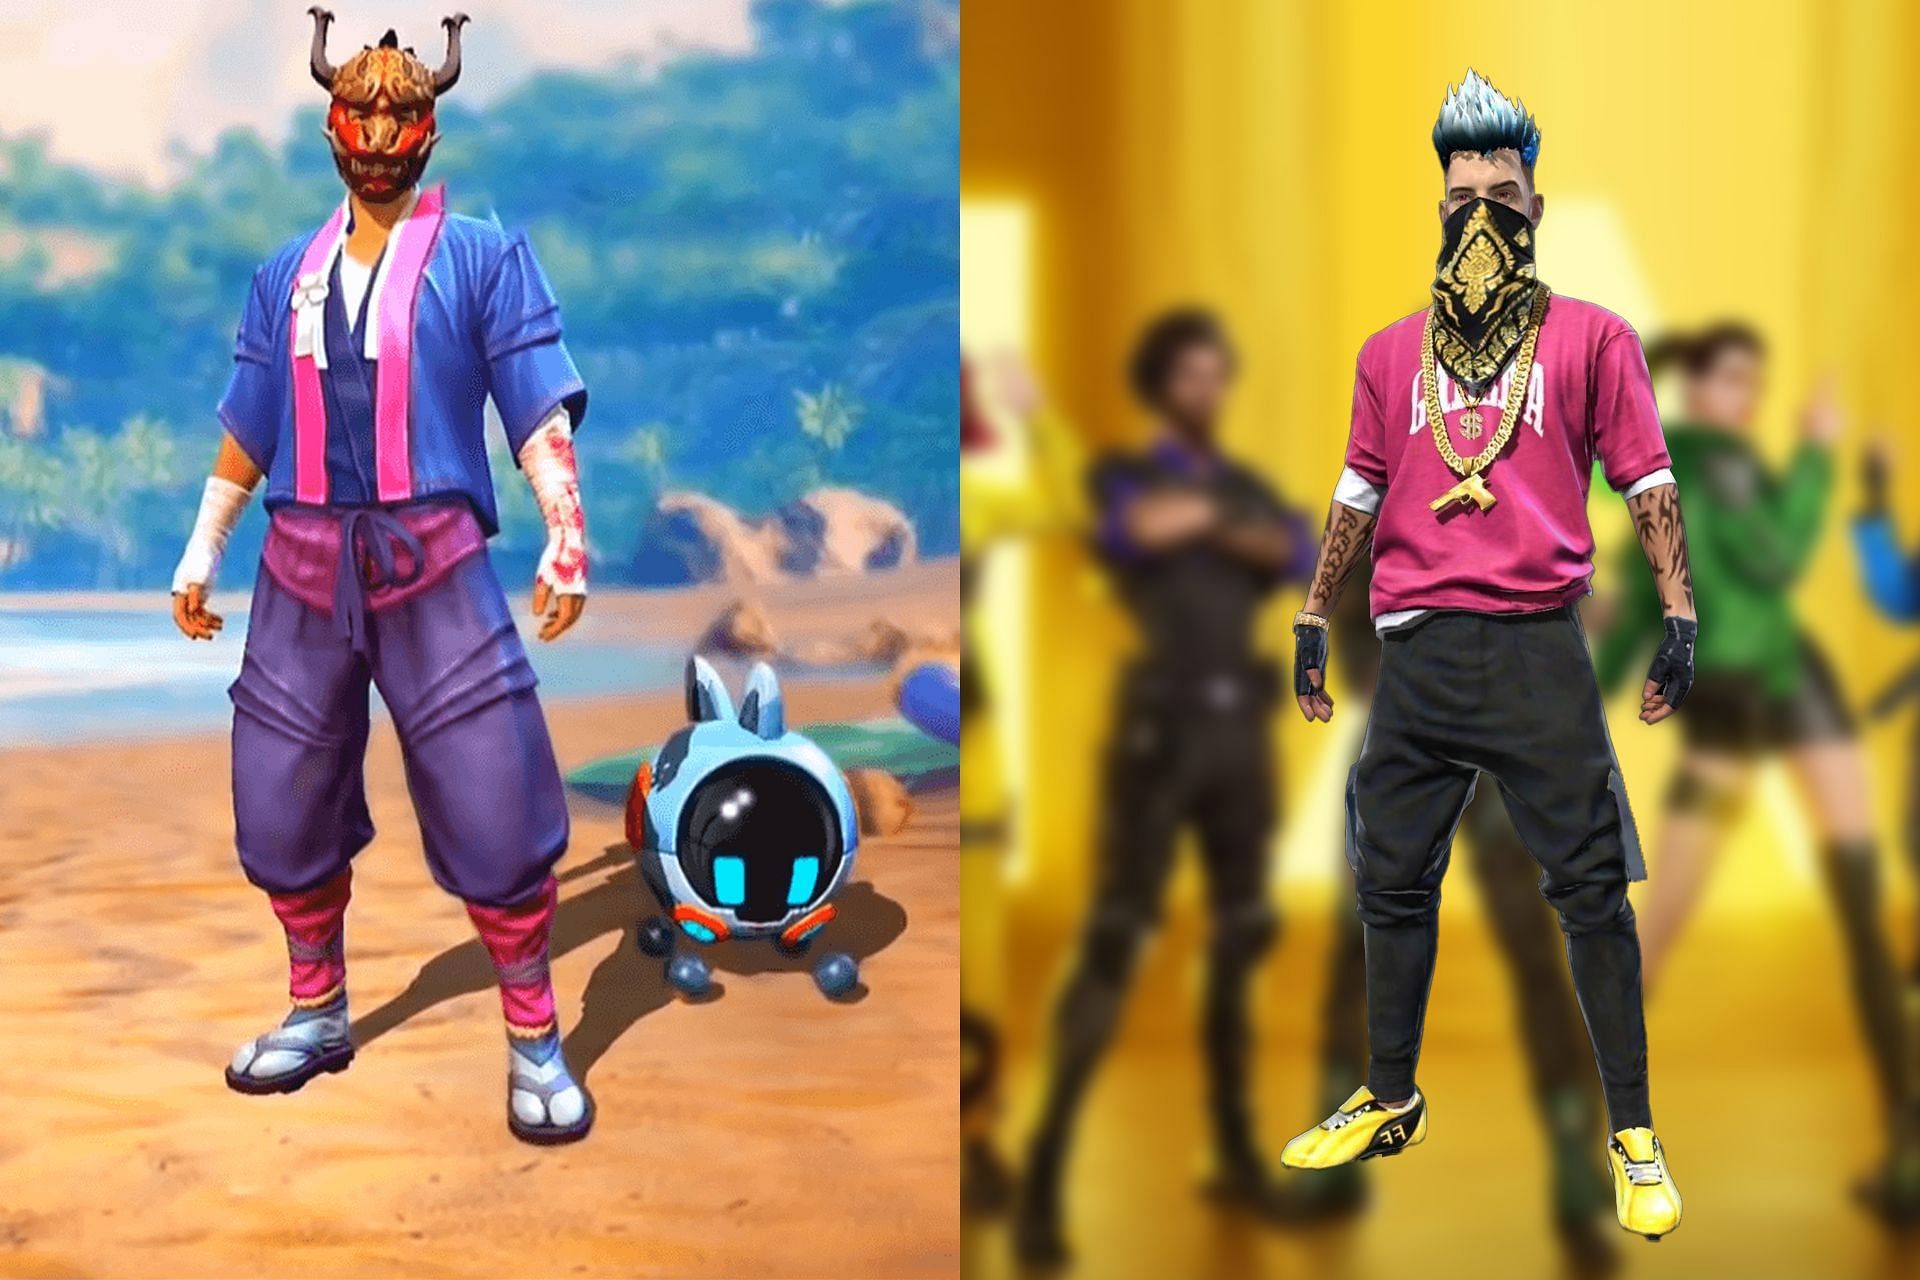 Fans can see the return of Sakura and Hip Hop outfit sets in Free Fire (Image via Sportskeeda)